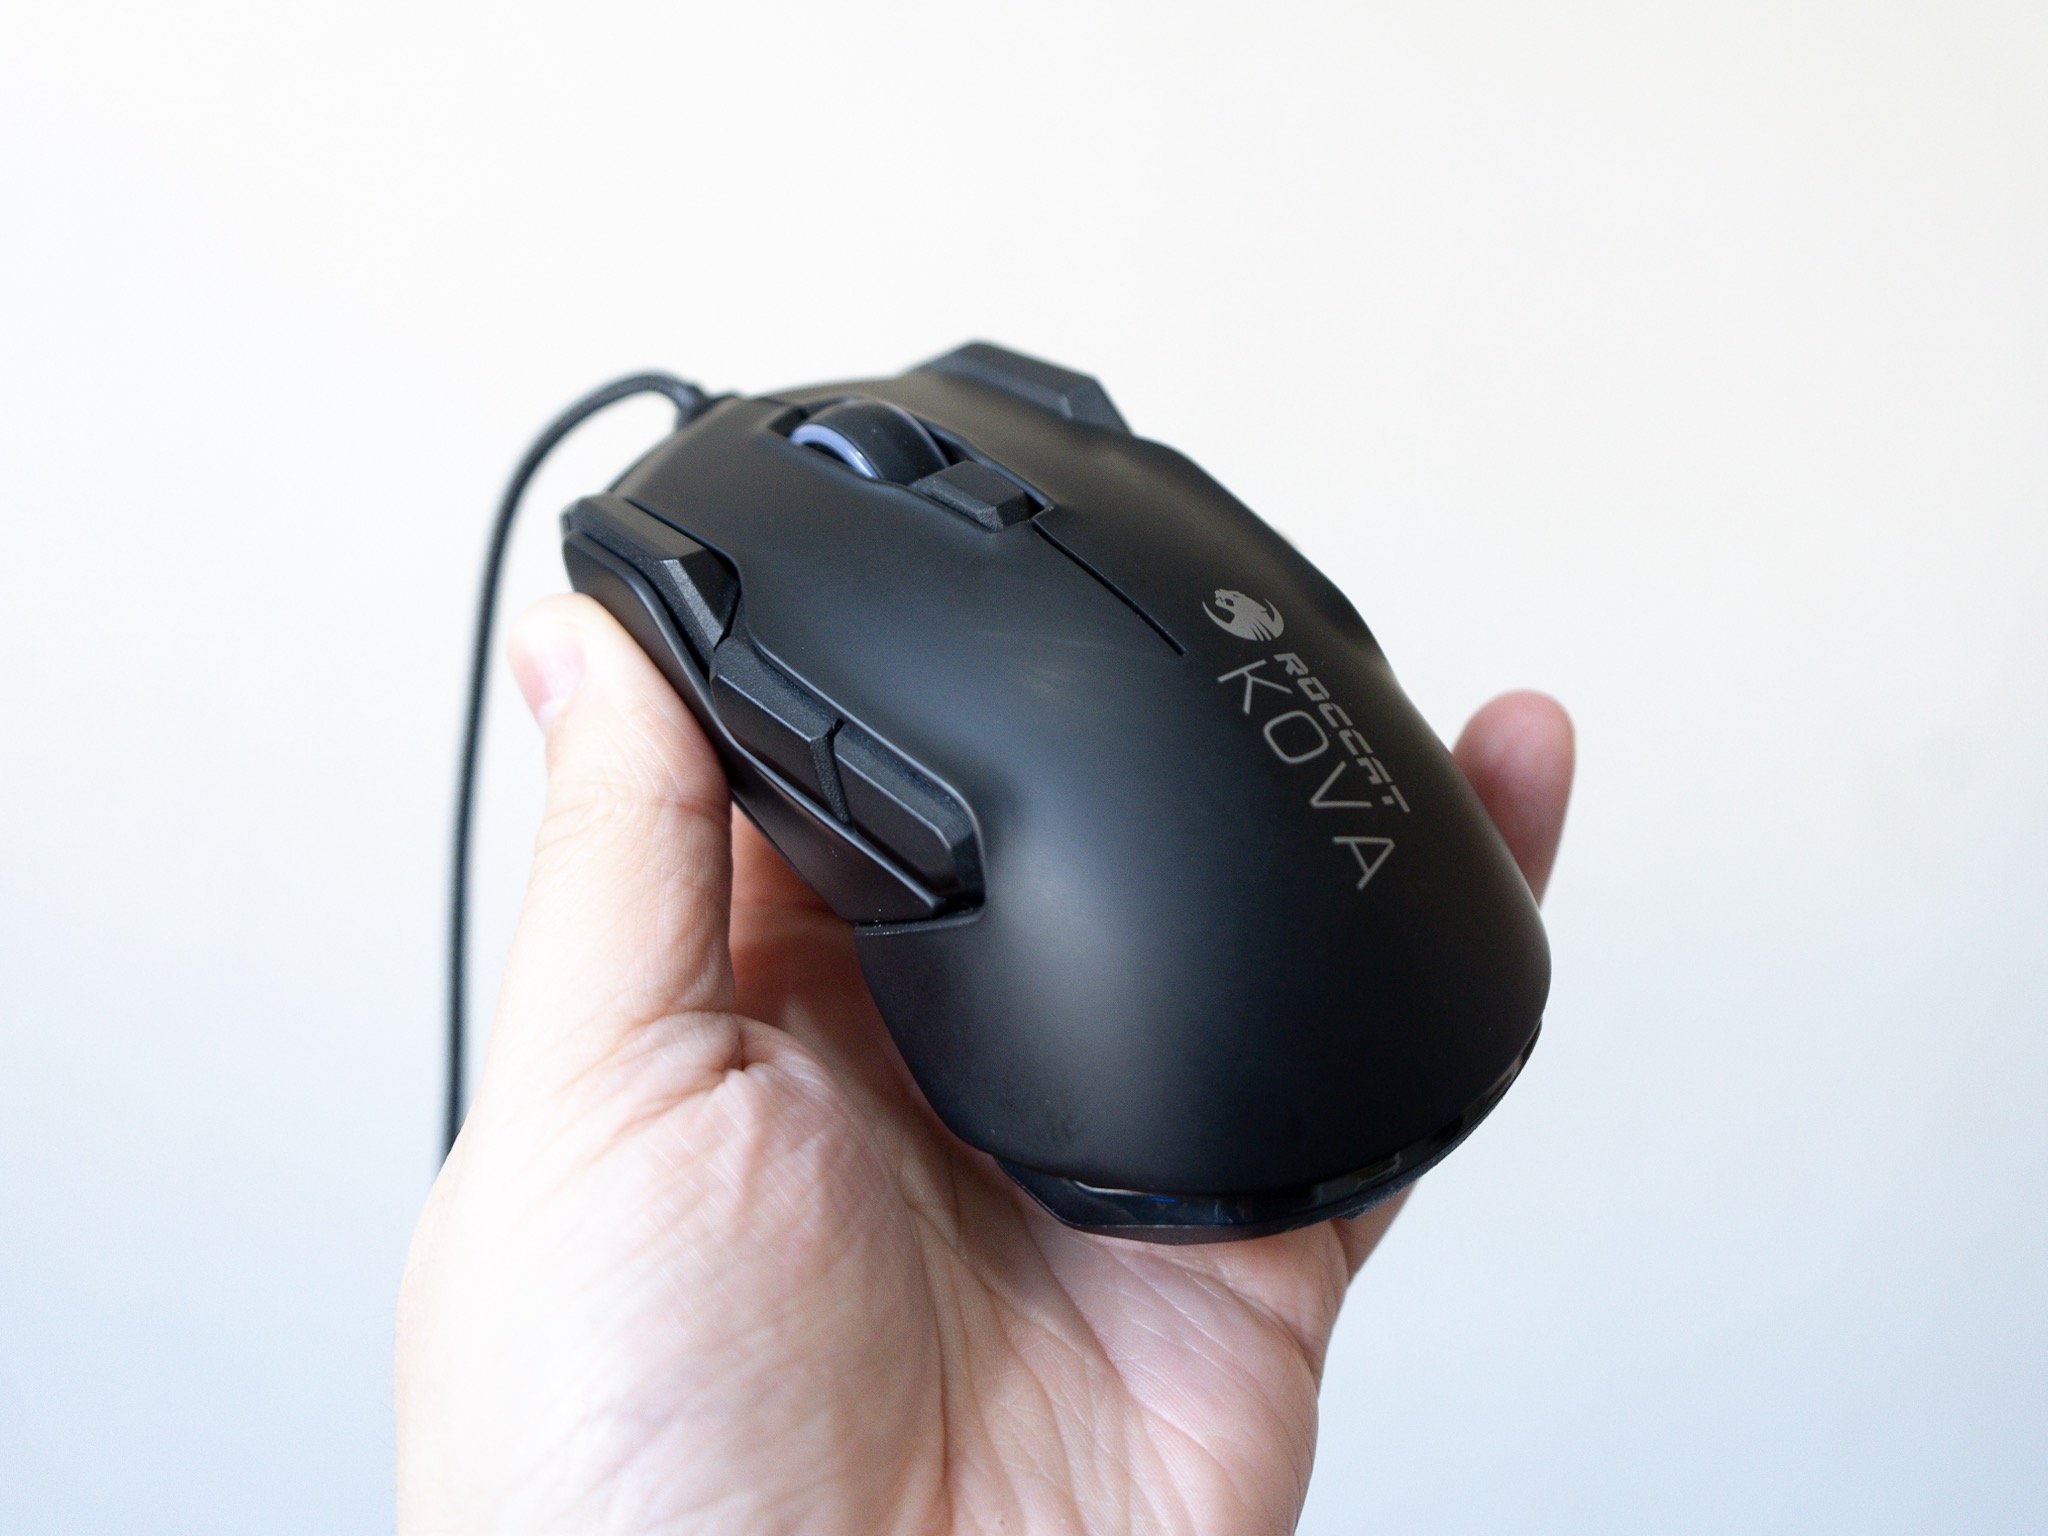 Roccat Kova AIMO A mouse a phenomenal price Central top Windows | at ambidextrous review